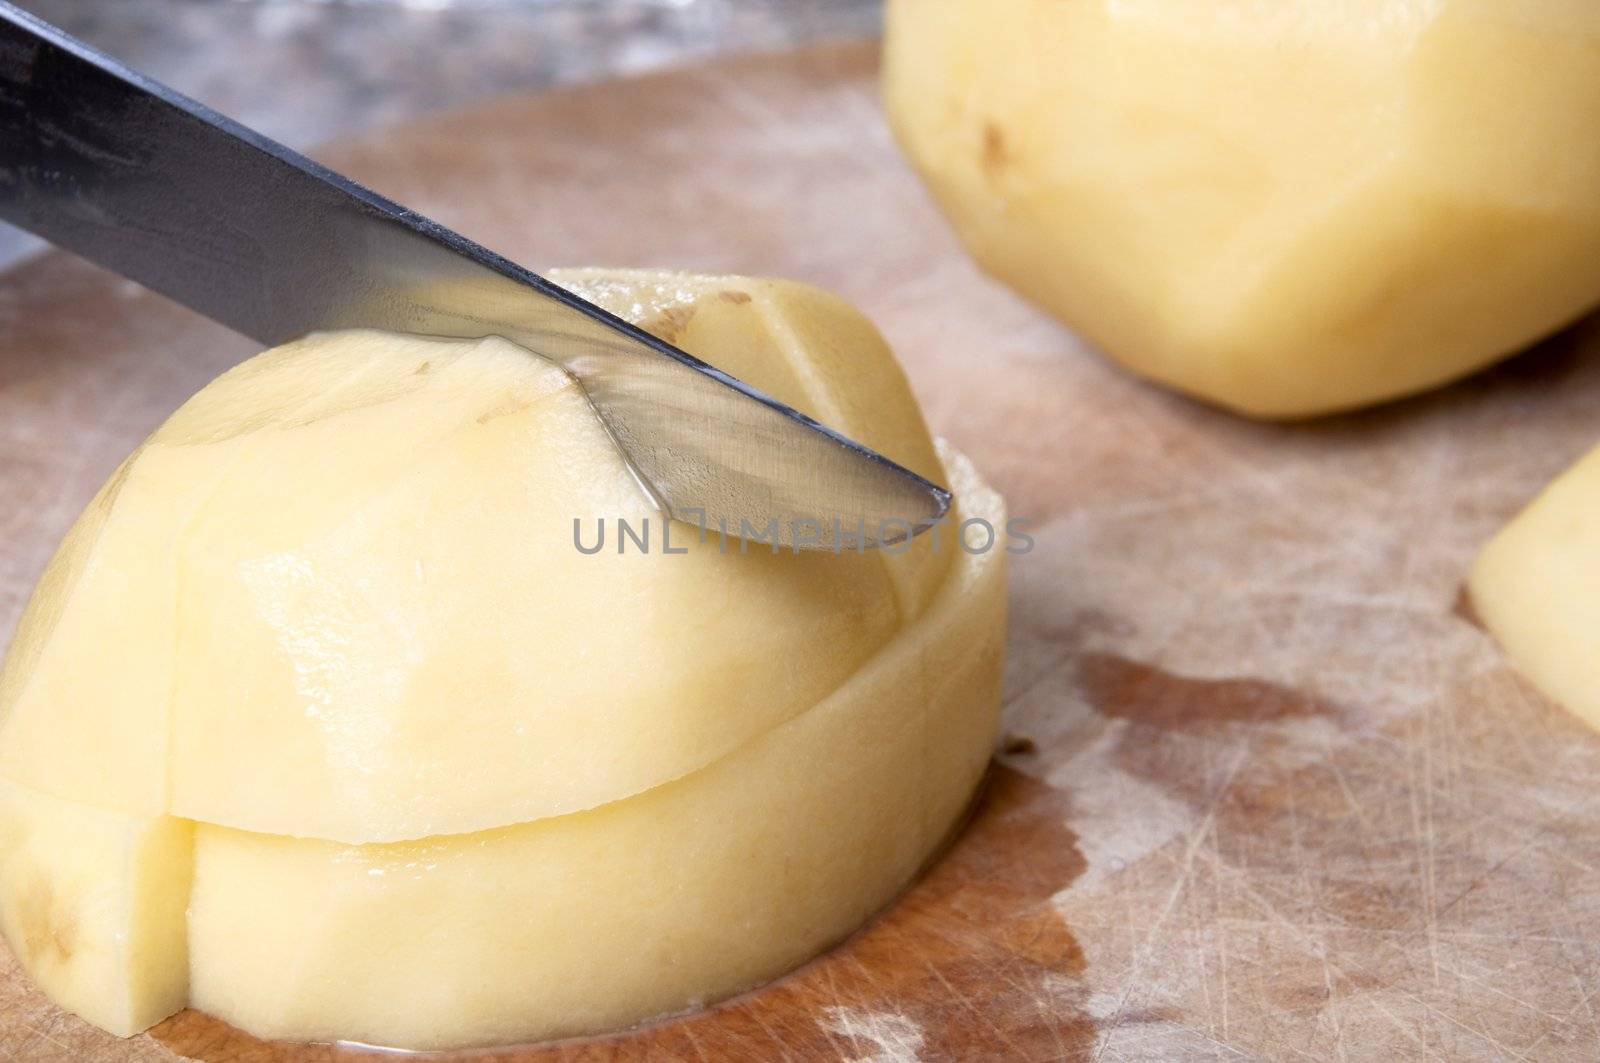 Close up action shot of potatoes being chopped on an old wooden chopping board, with visible cut marks.  Counter top visible in background.  